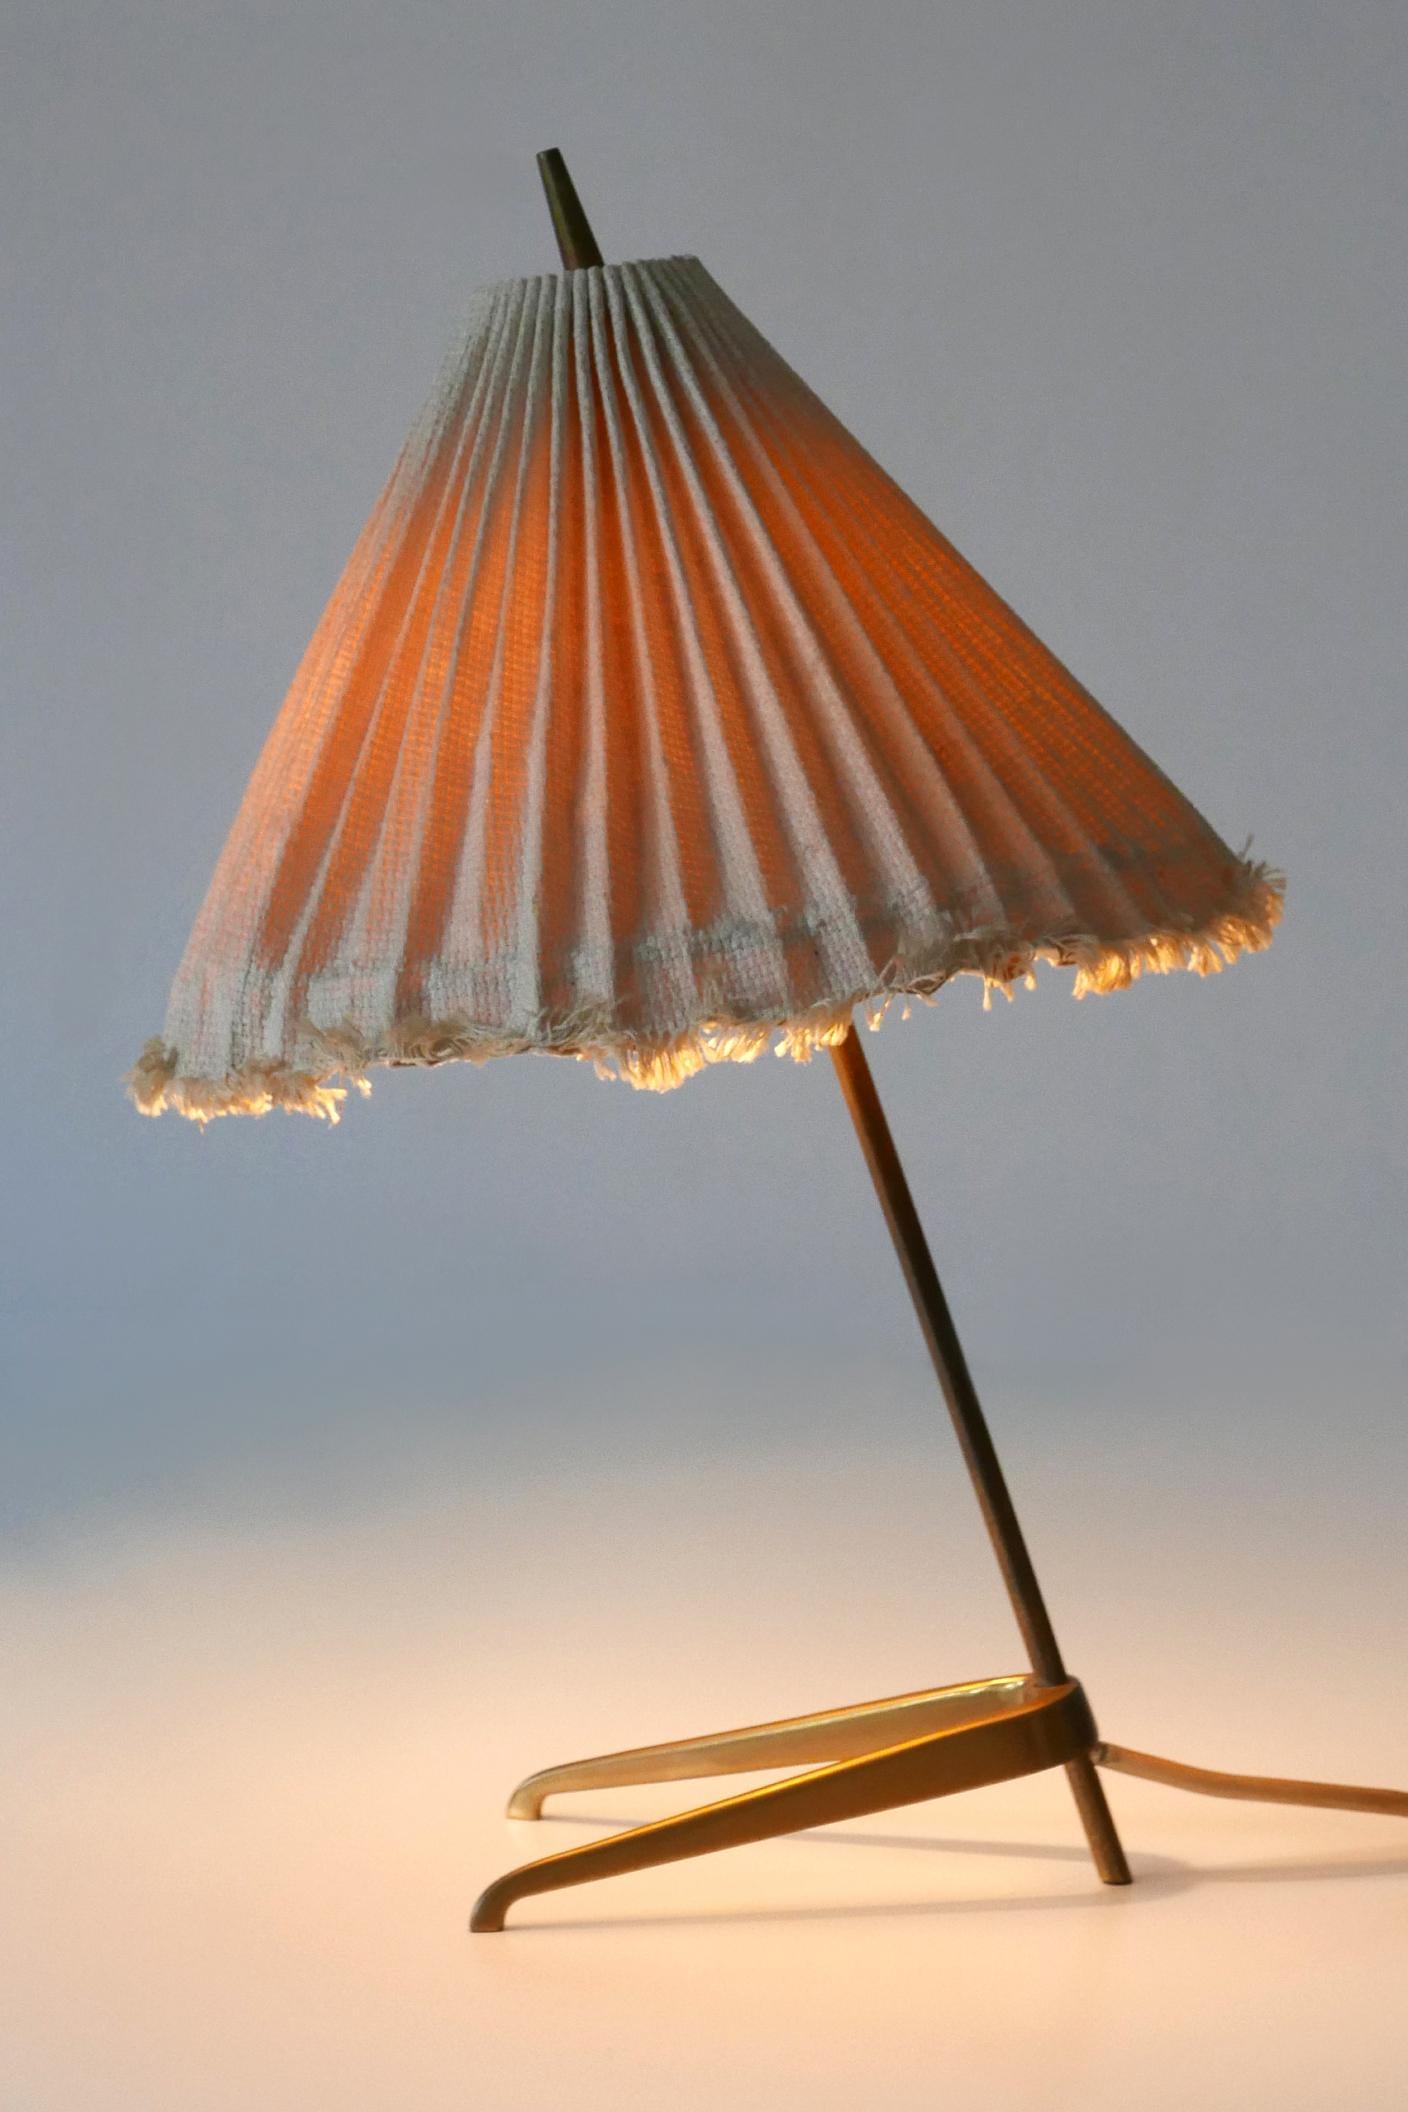 Extremely rare and elegant Mid-Century Modern table lamp. Designed & manufactured probably by J.T. Kalmar, Austria, 1950s.

Executed in brass and fabric, the table lamp comes with 1 x E14 / E12 Edison screw fit bulb holder, is wired, in working